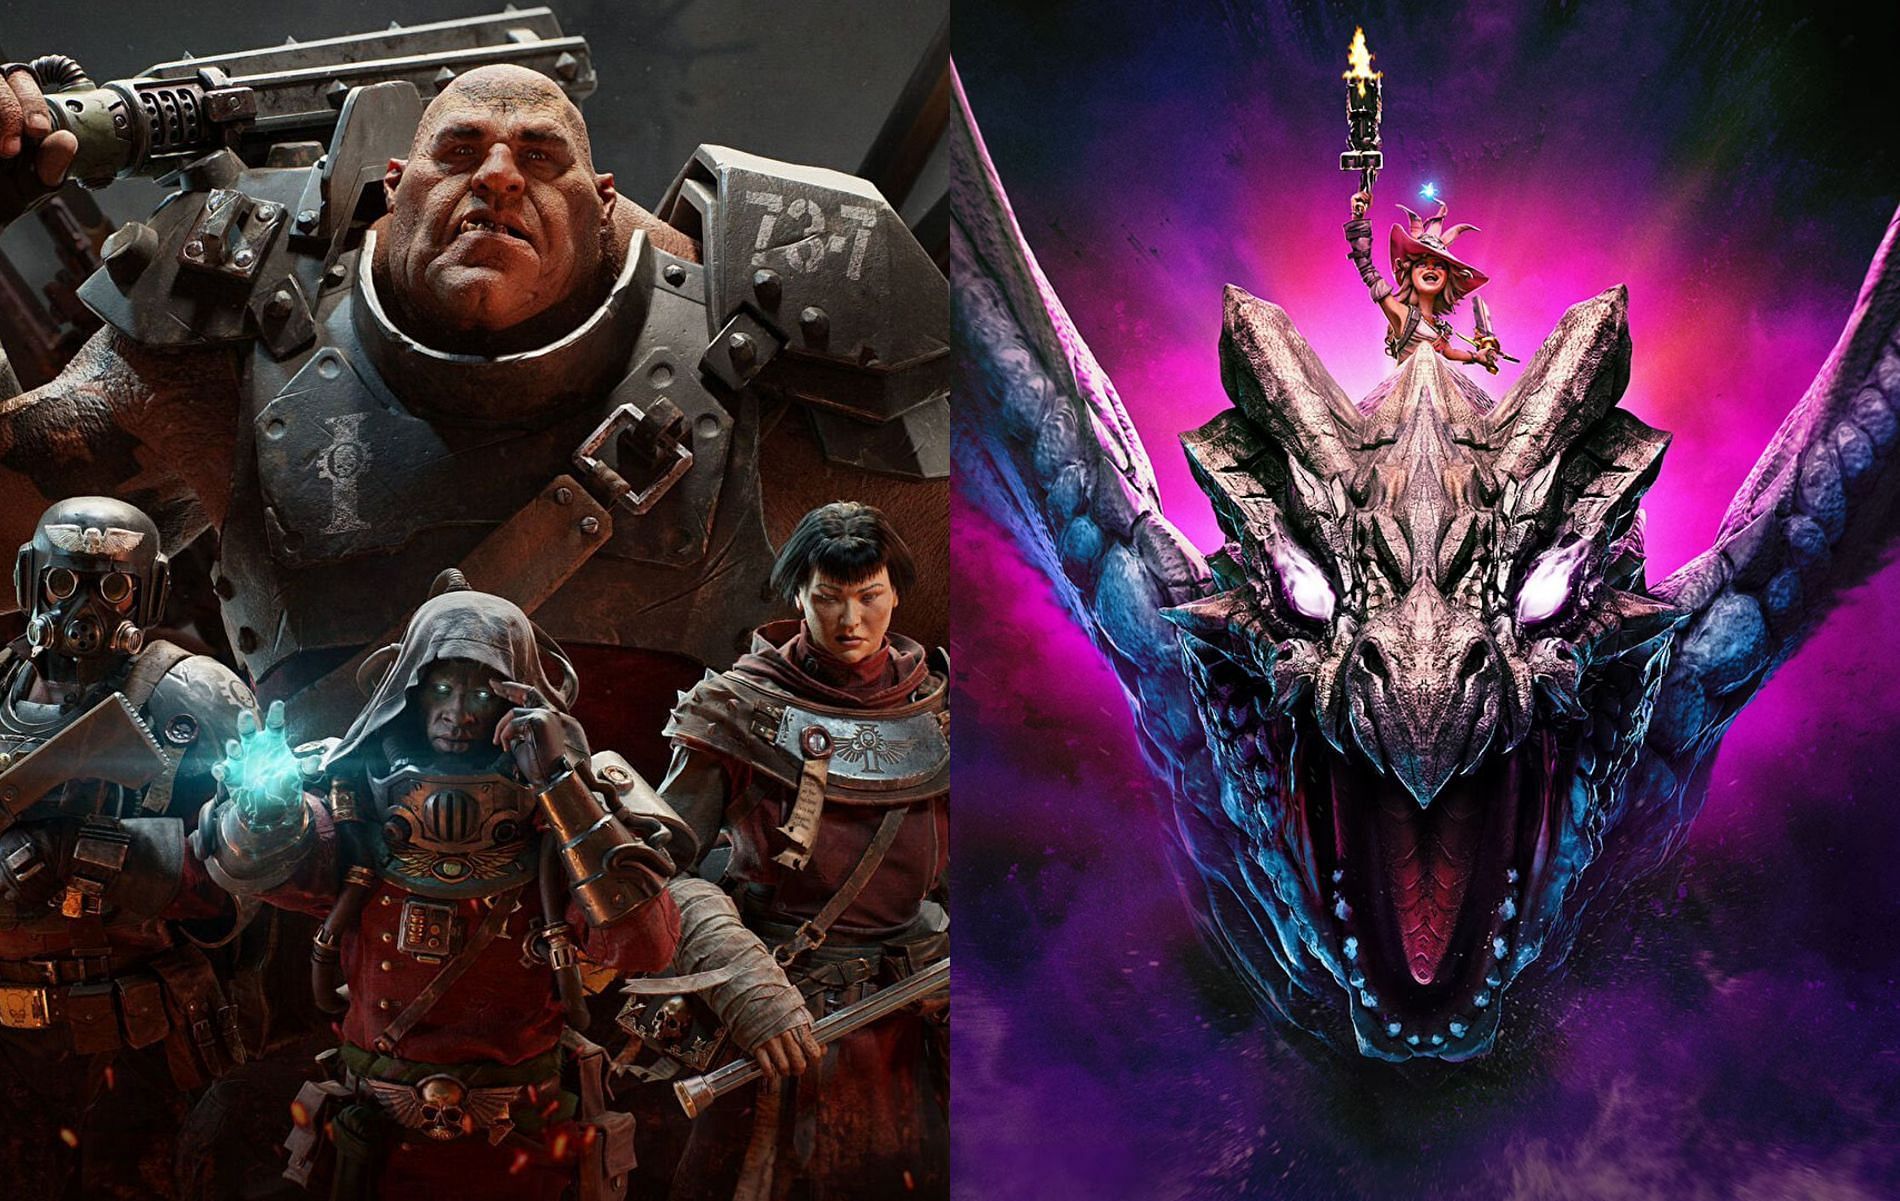 2022 is home to many interesting co-op games (Images via Fatshark/Gearbox Software)